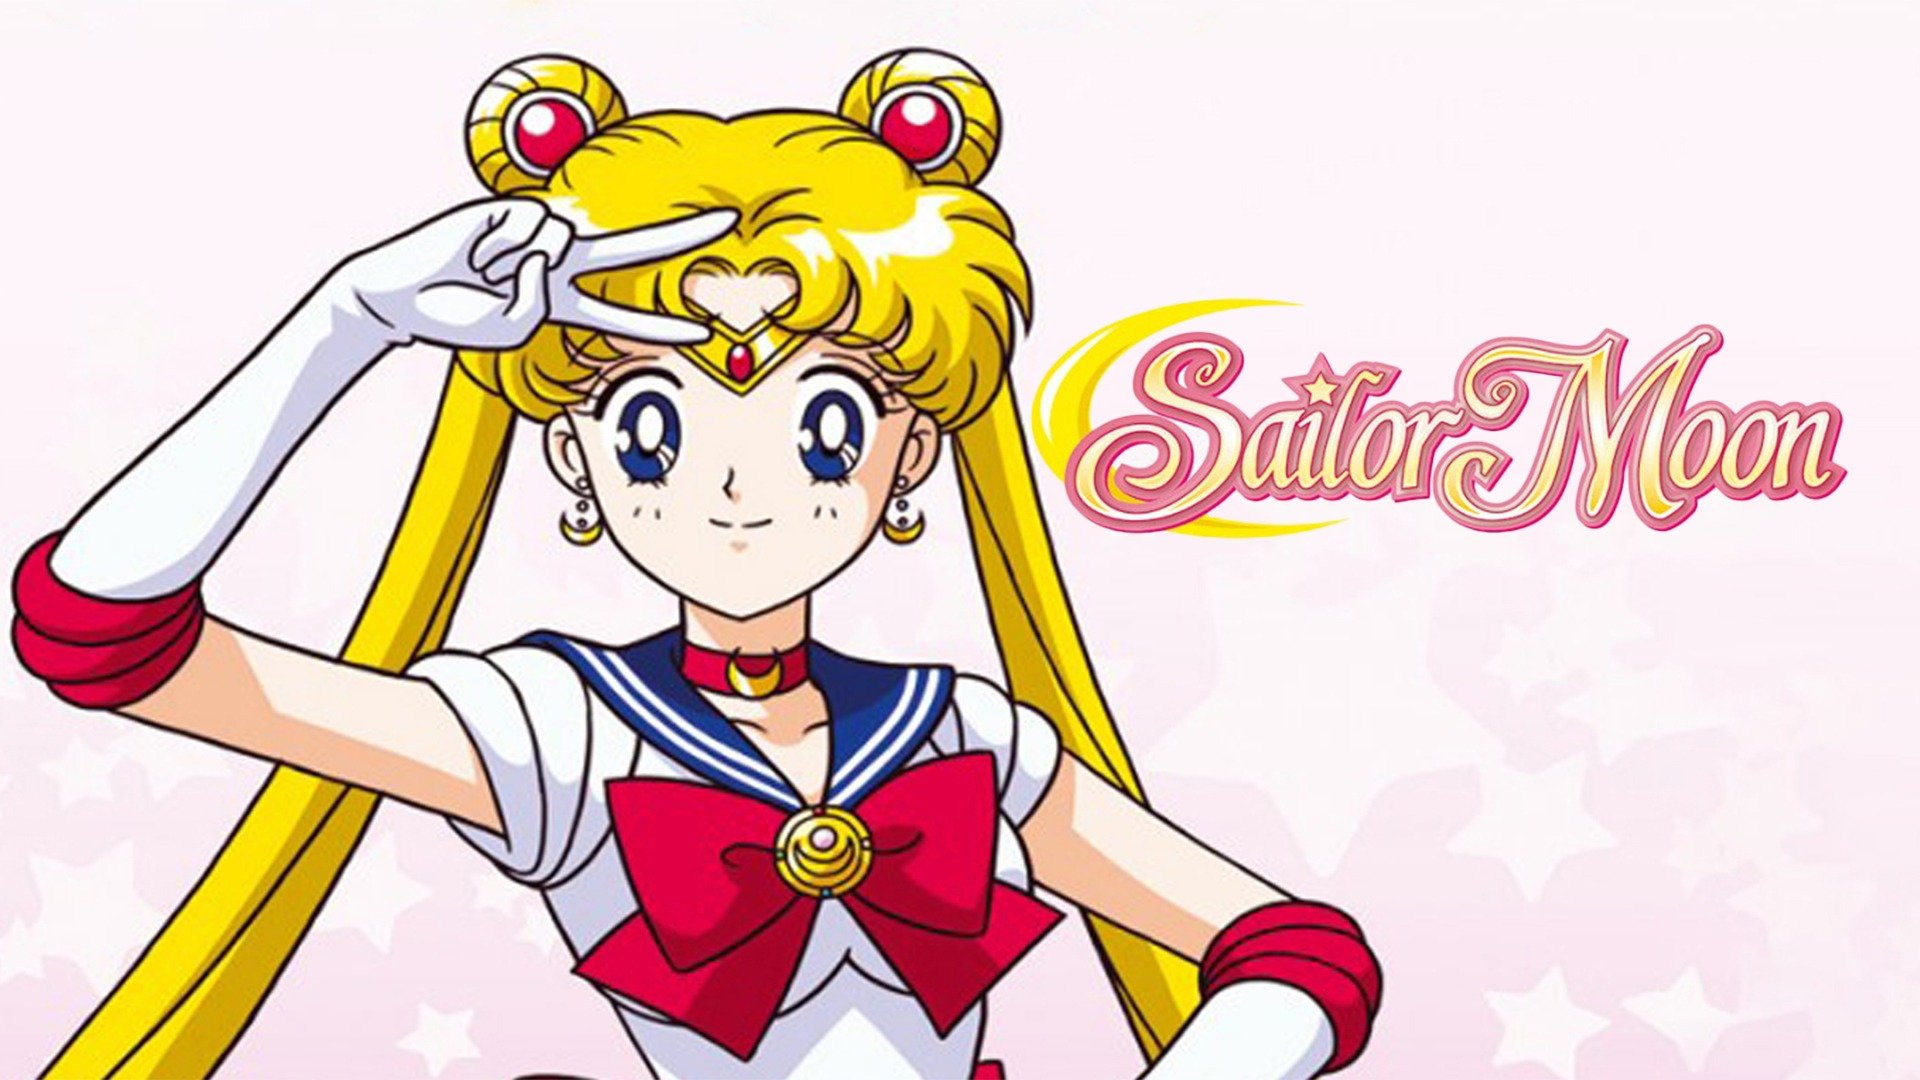 Just watched up through episode 13 of Sailor Moon. (First time watcher,  original version, english dub). My full thoughts will be in the comments  below. Kinda like this anime and having a